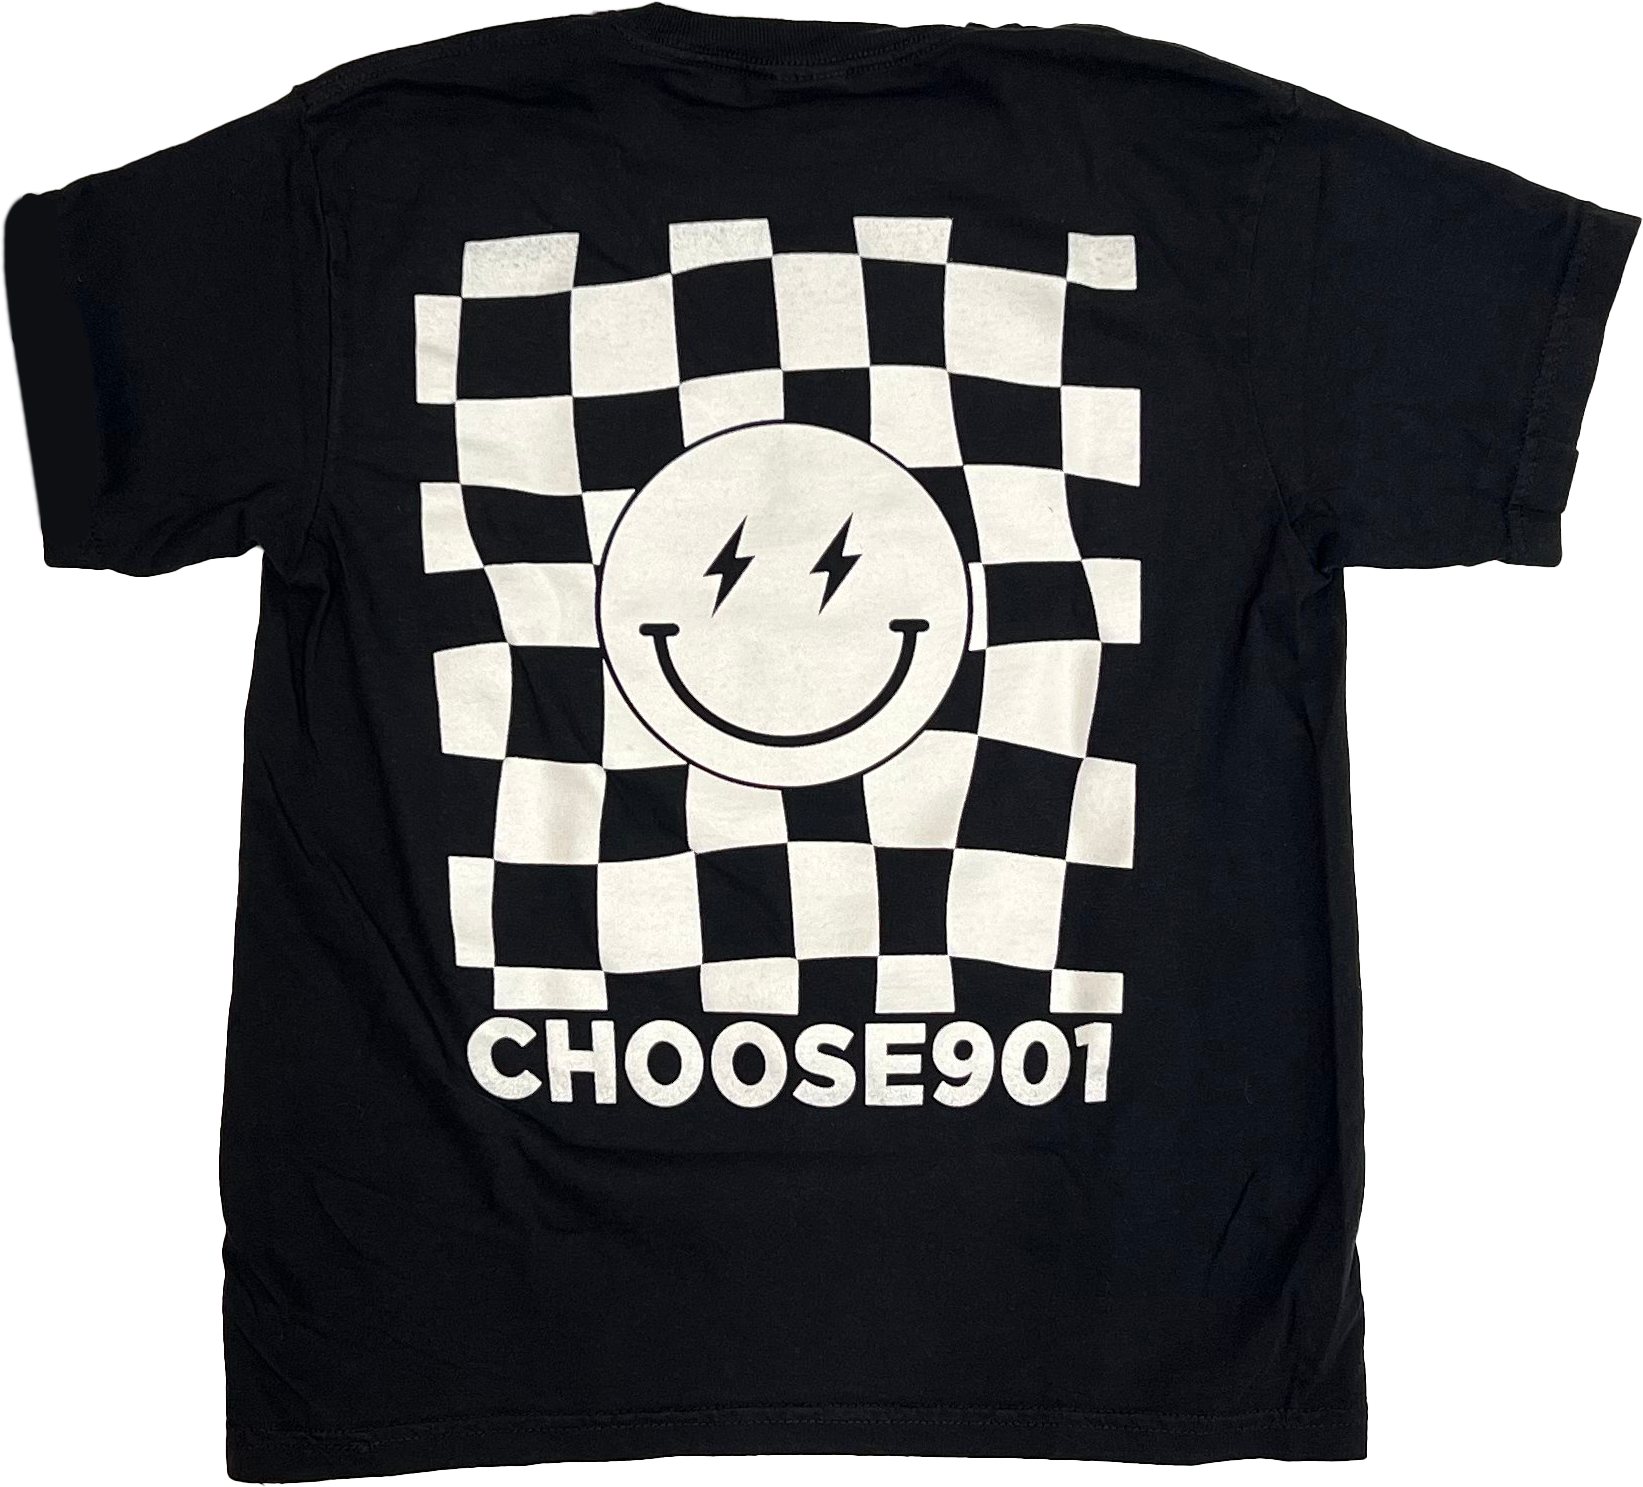 Choose901 Merch Shop's Youth Choose901 Lightning Smiley on Black shirt, featuring a checkered pattern and a smiling face design, with the text "choose901" at the bottom.